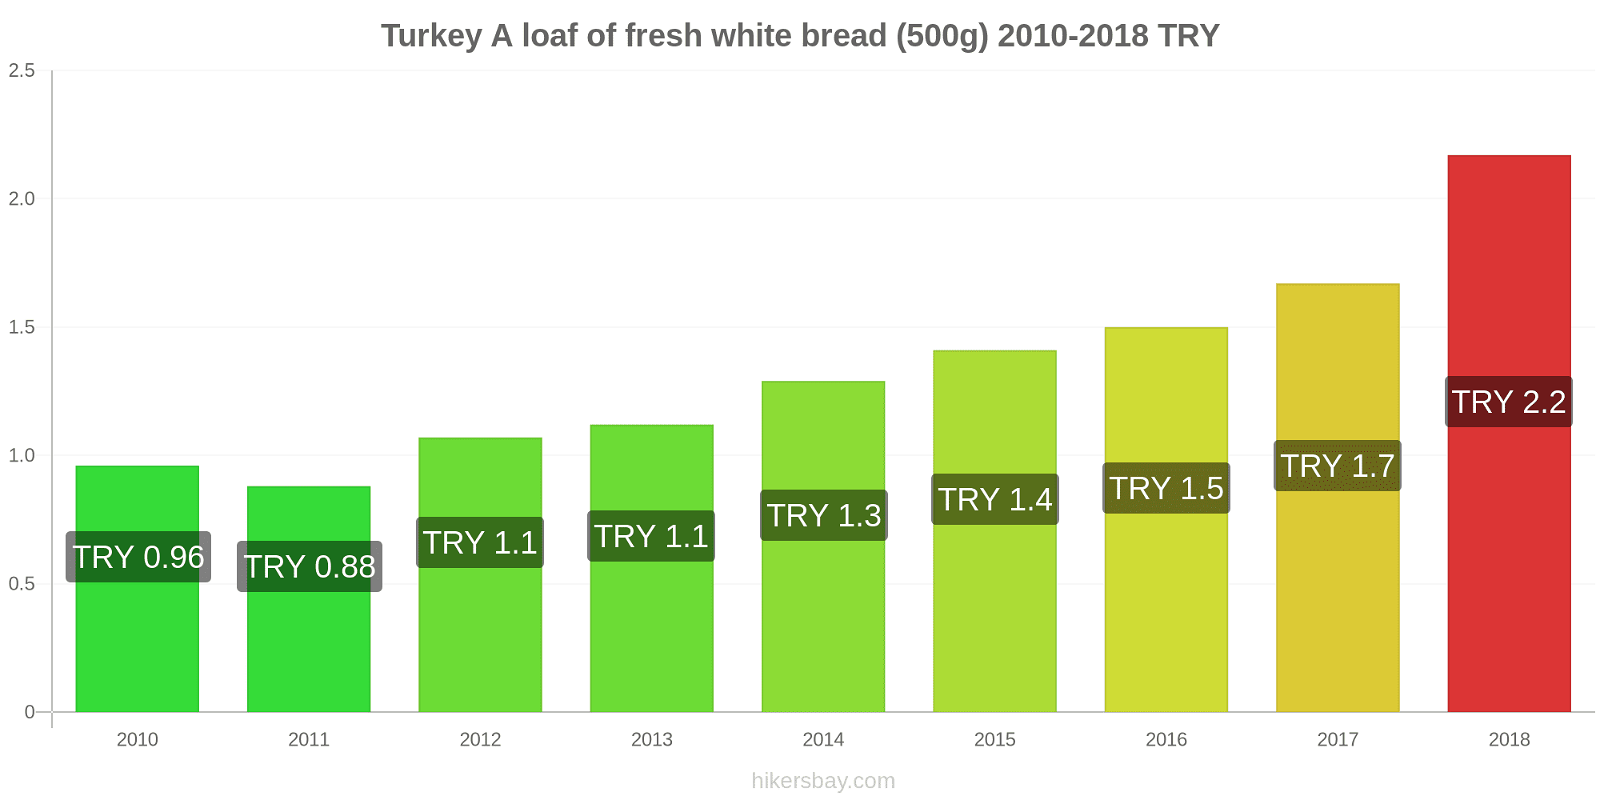 Turkey price changes A loaf of fresh white bread (500g) hikersbay.com